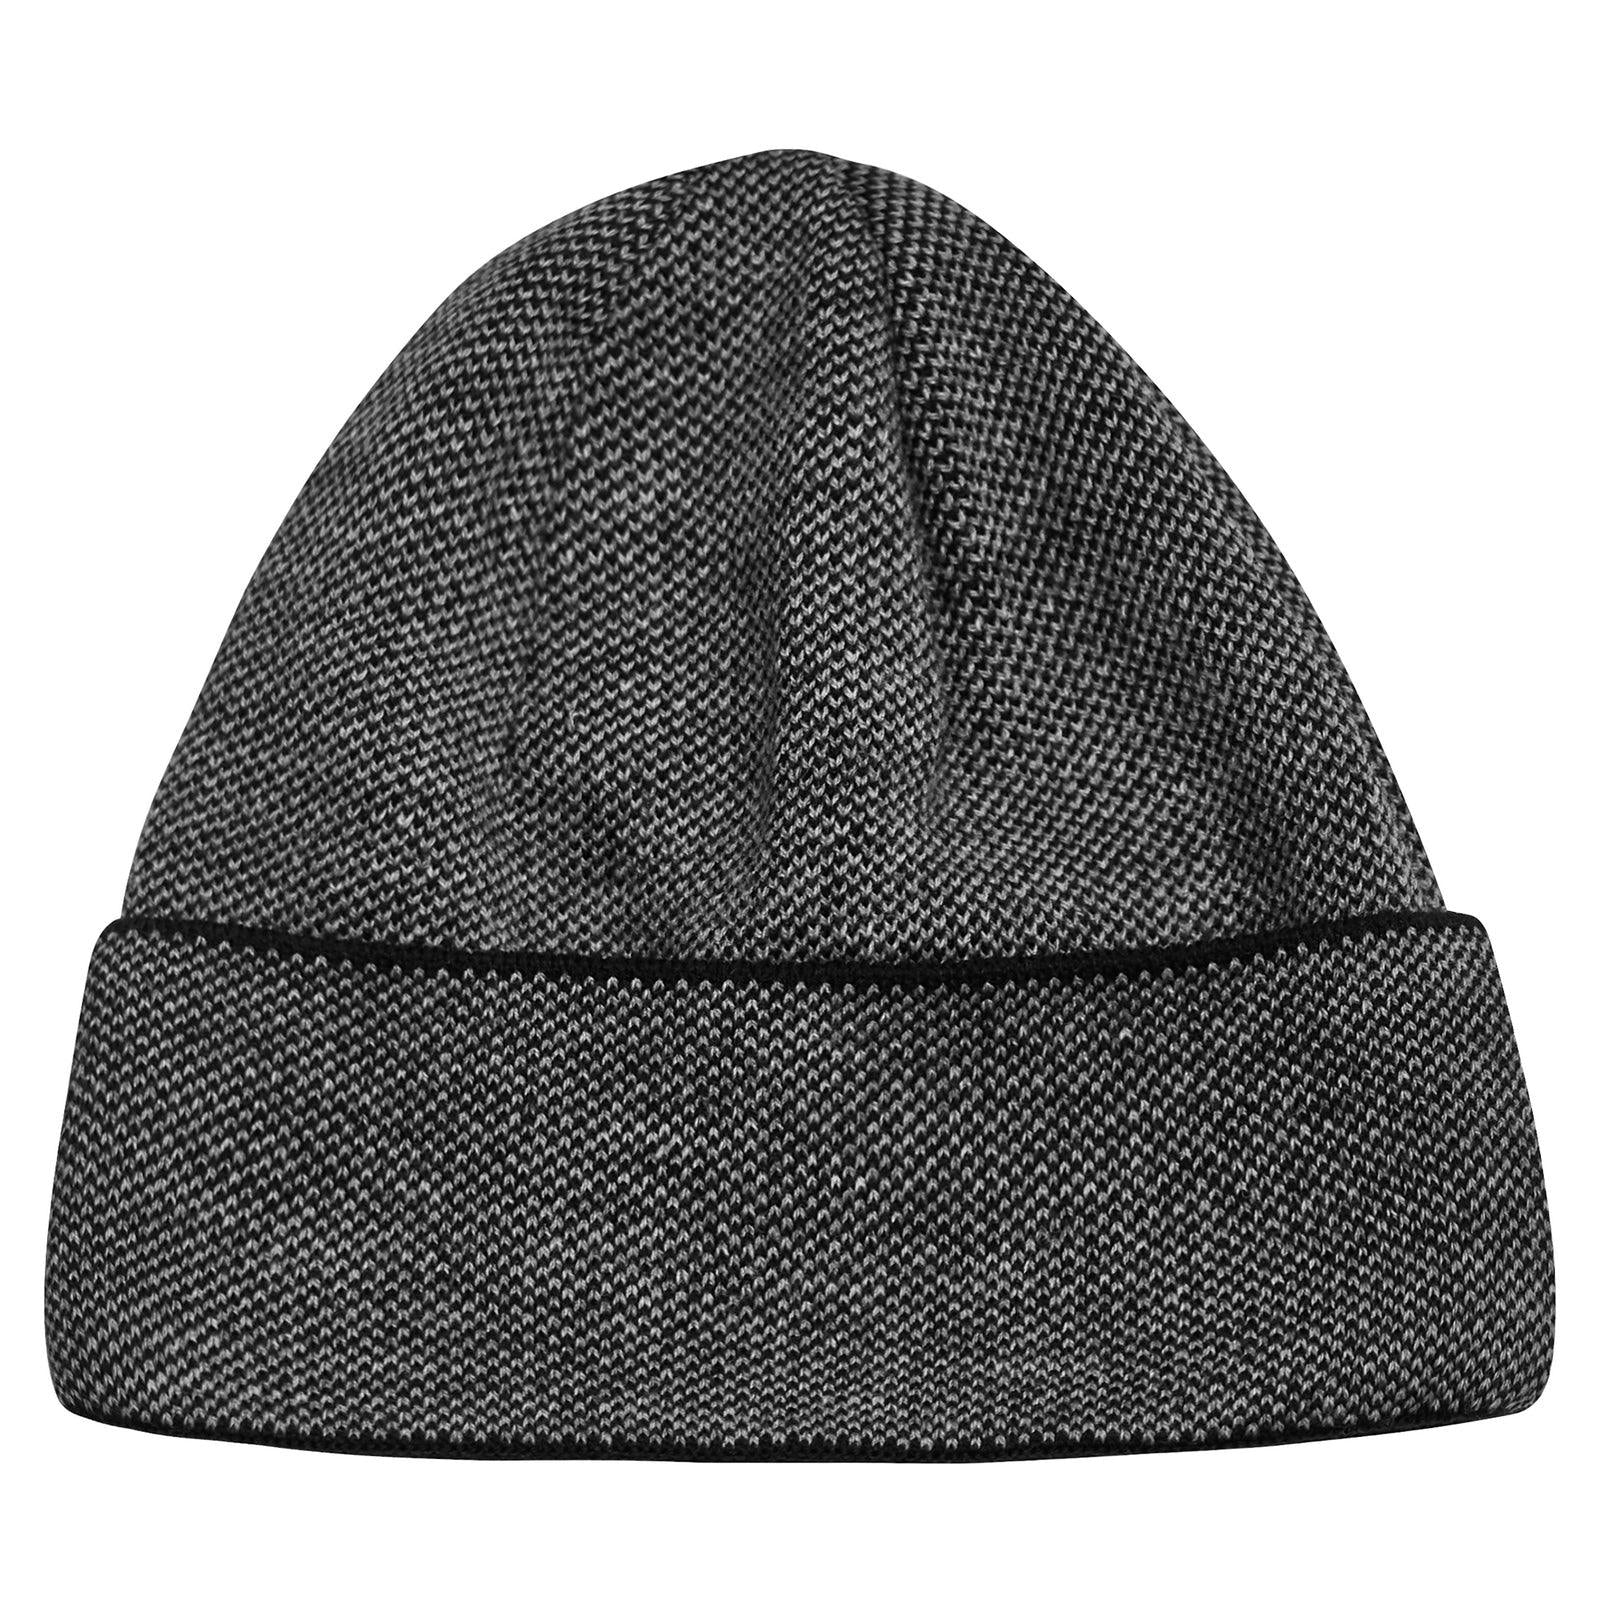 W6467 - Mens Boys Ladies Unisex Wooly Knitted Beanie Ski Hat Warm Winter Turn Up Chunky-TruClothing